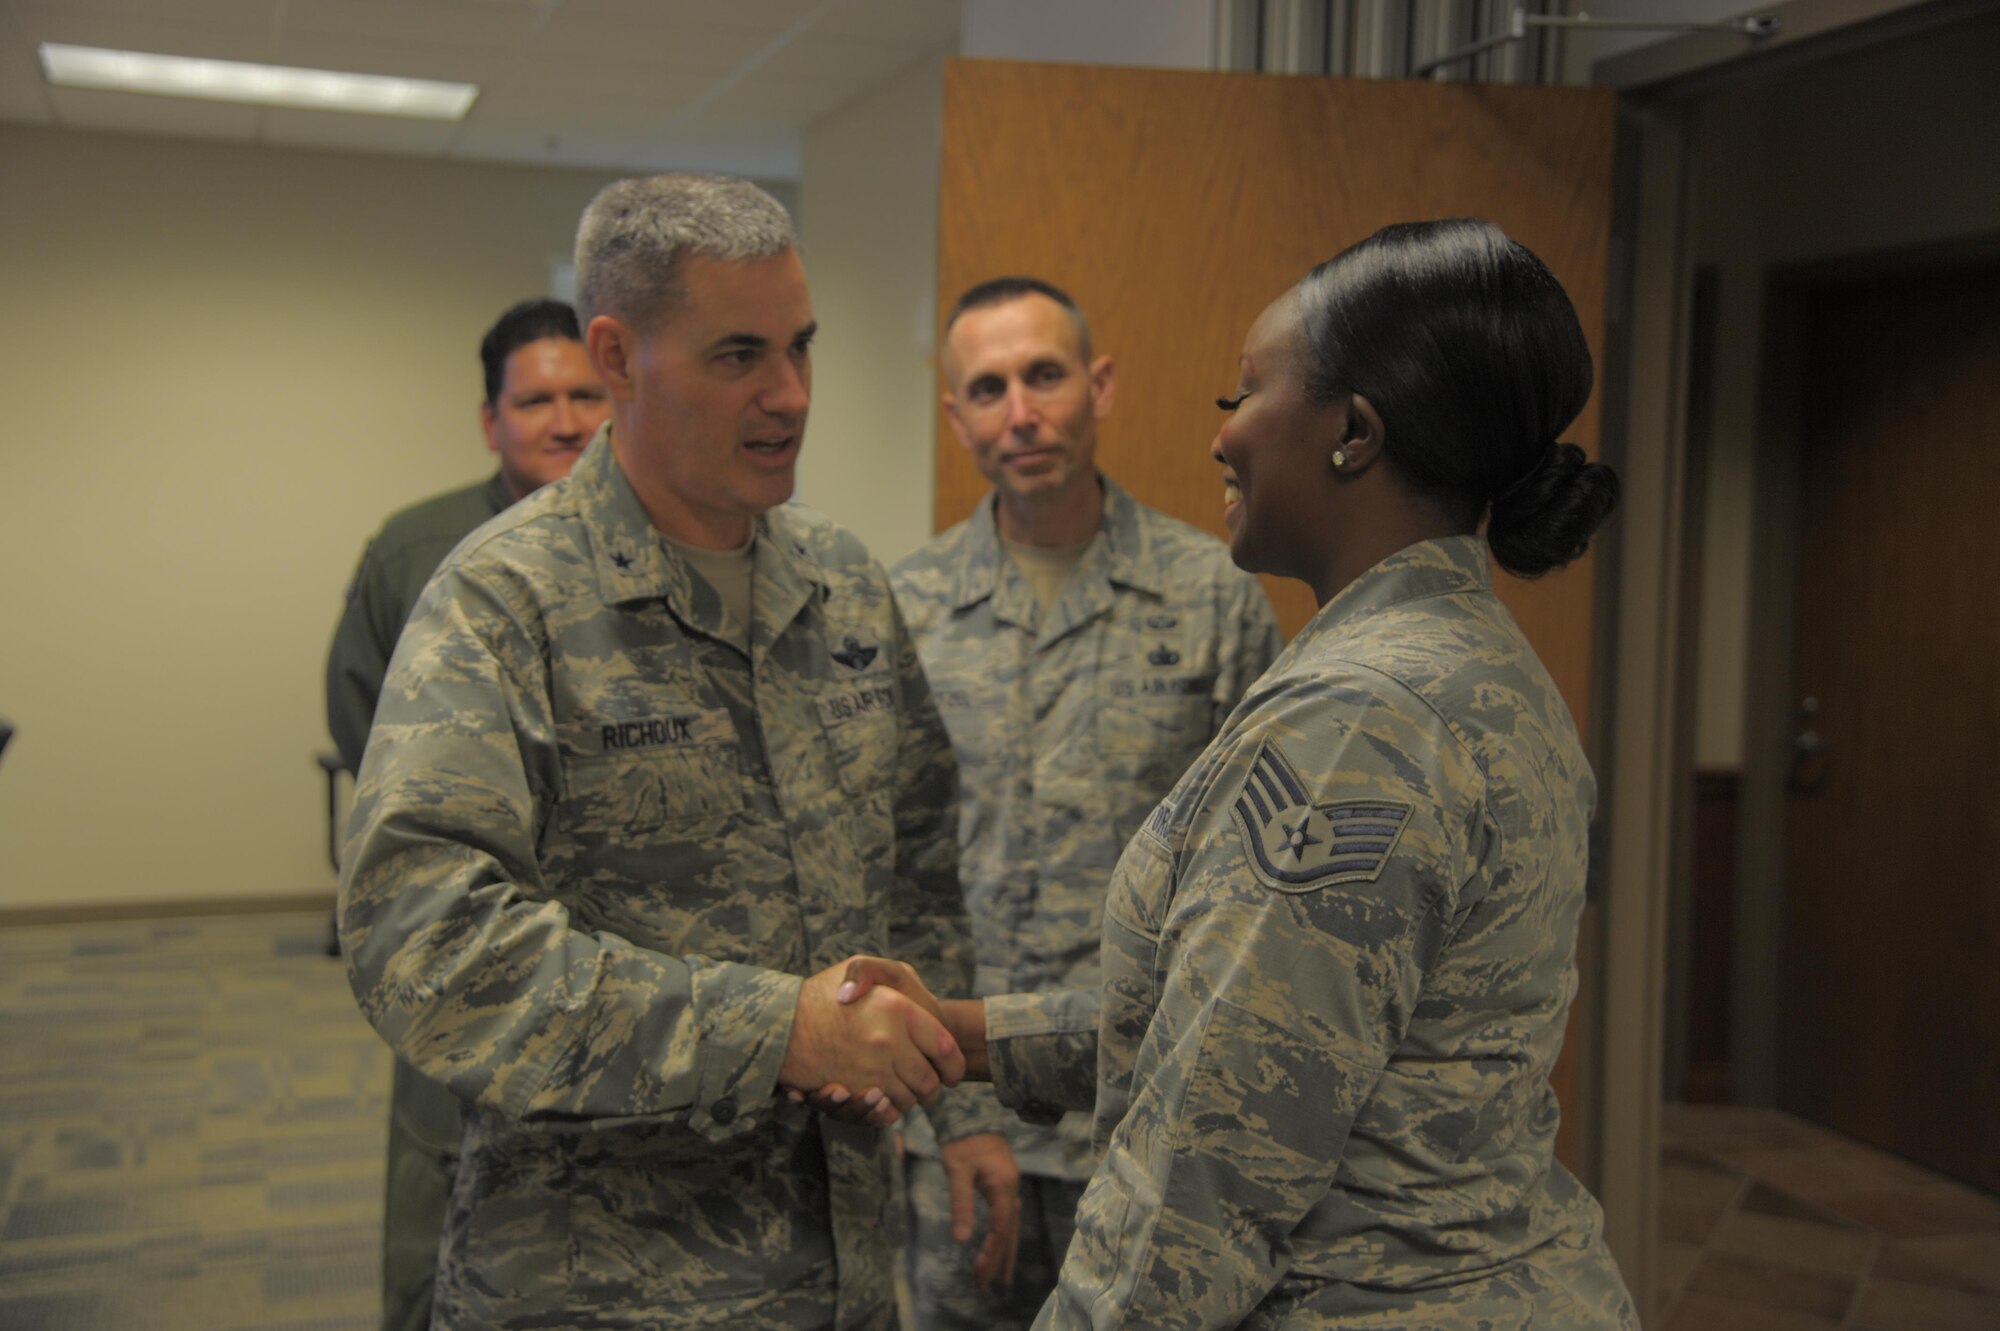 Brig. Gen. Lenny Richoux, 18th Air Force vice commander, presents a coin to Staff Sgt. Paquita Williams, 91st Air Refueling Squadron Aviation Resource Management NCO in charge, at MacDill Air Force Base, Florida, Feb. 2, 2017. Richoux met with many star performers around MacDill during his visit of the base and spoke at the 6th Air Mobility Wing’s annual-awards ceremony the following night. (U.S. Air Force photo by Airman 1st Class Adam R. Shanks)